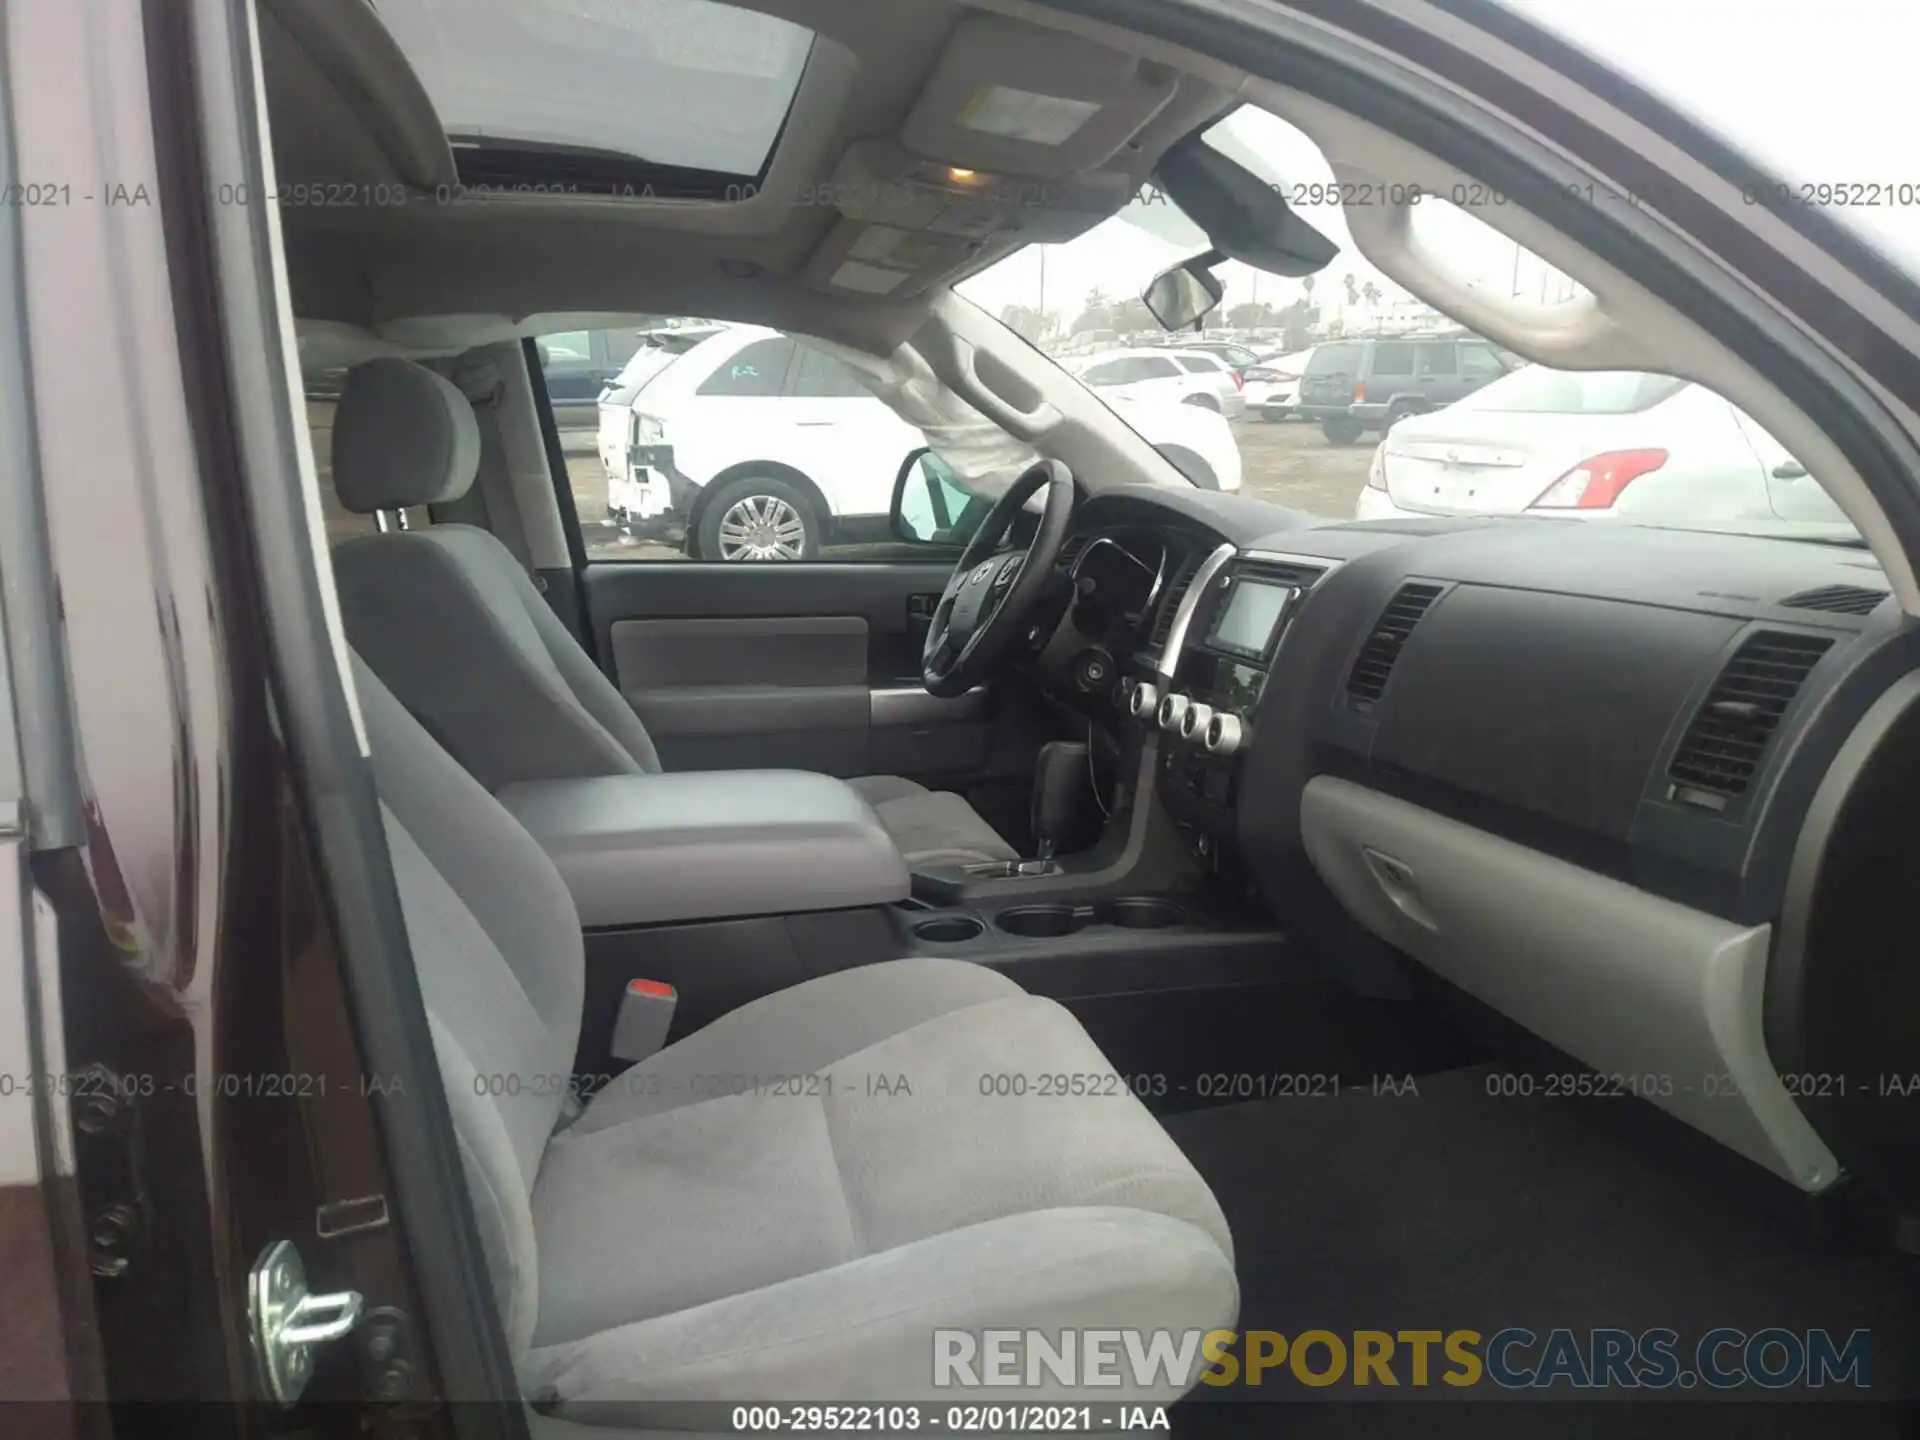 5 Photograph of a damaged car 5TDBY5G16KS173468 TOYOTA SEQUOIA 2019